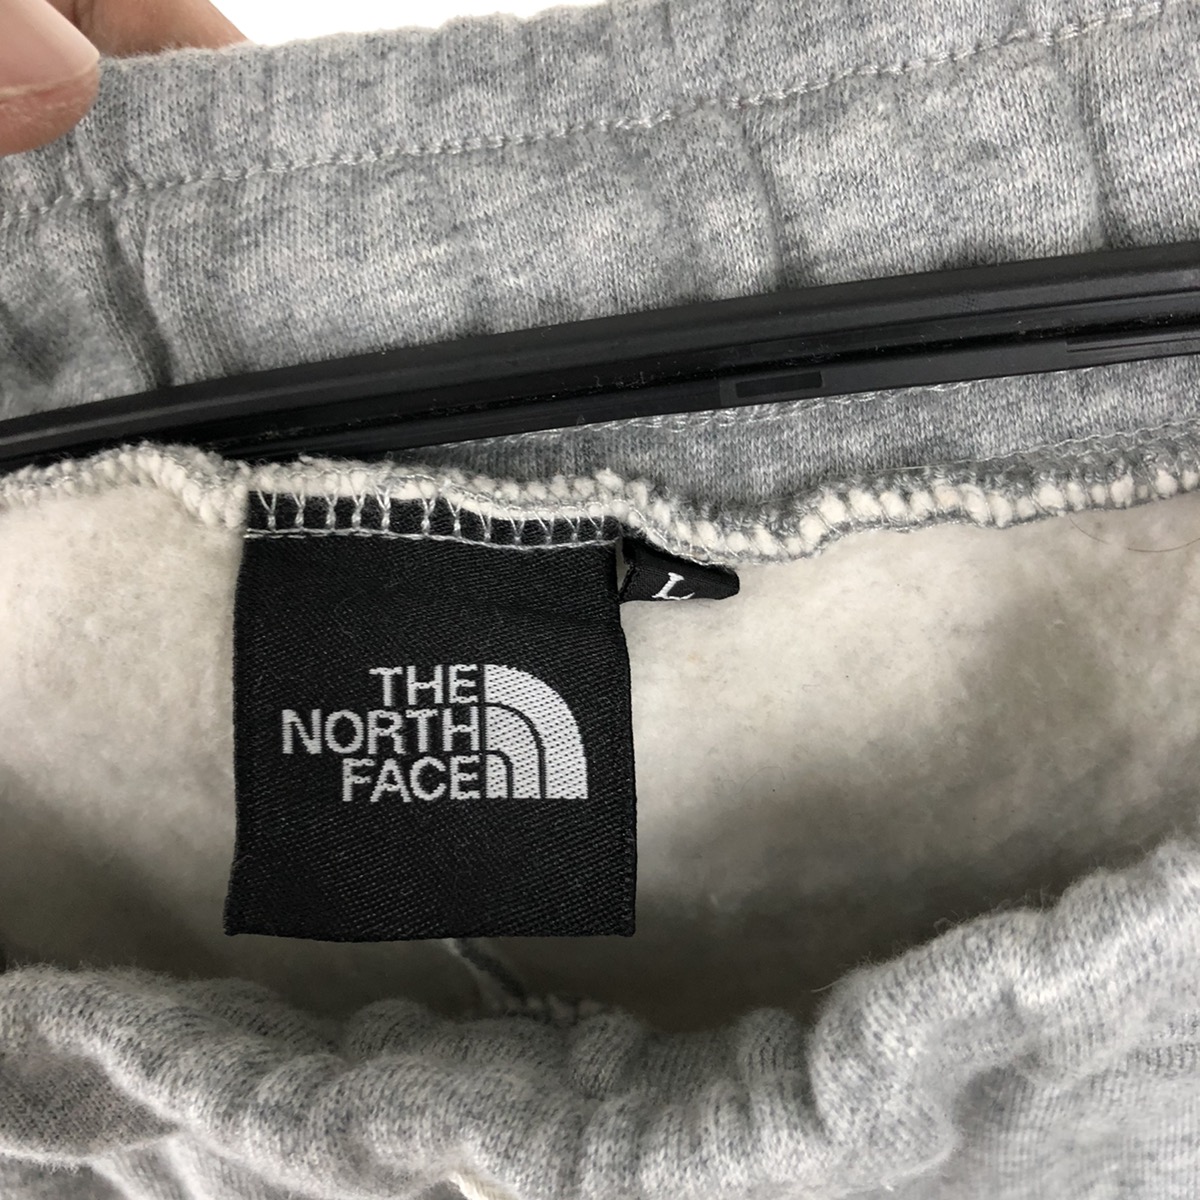 THE NORTH FACE SWEATPANTS - 7